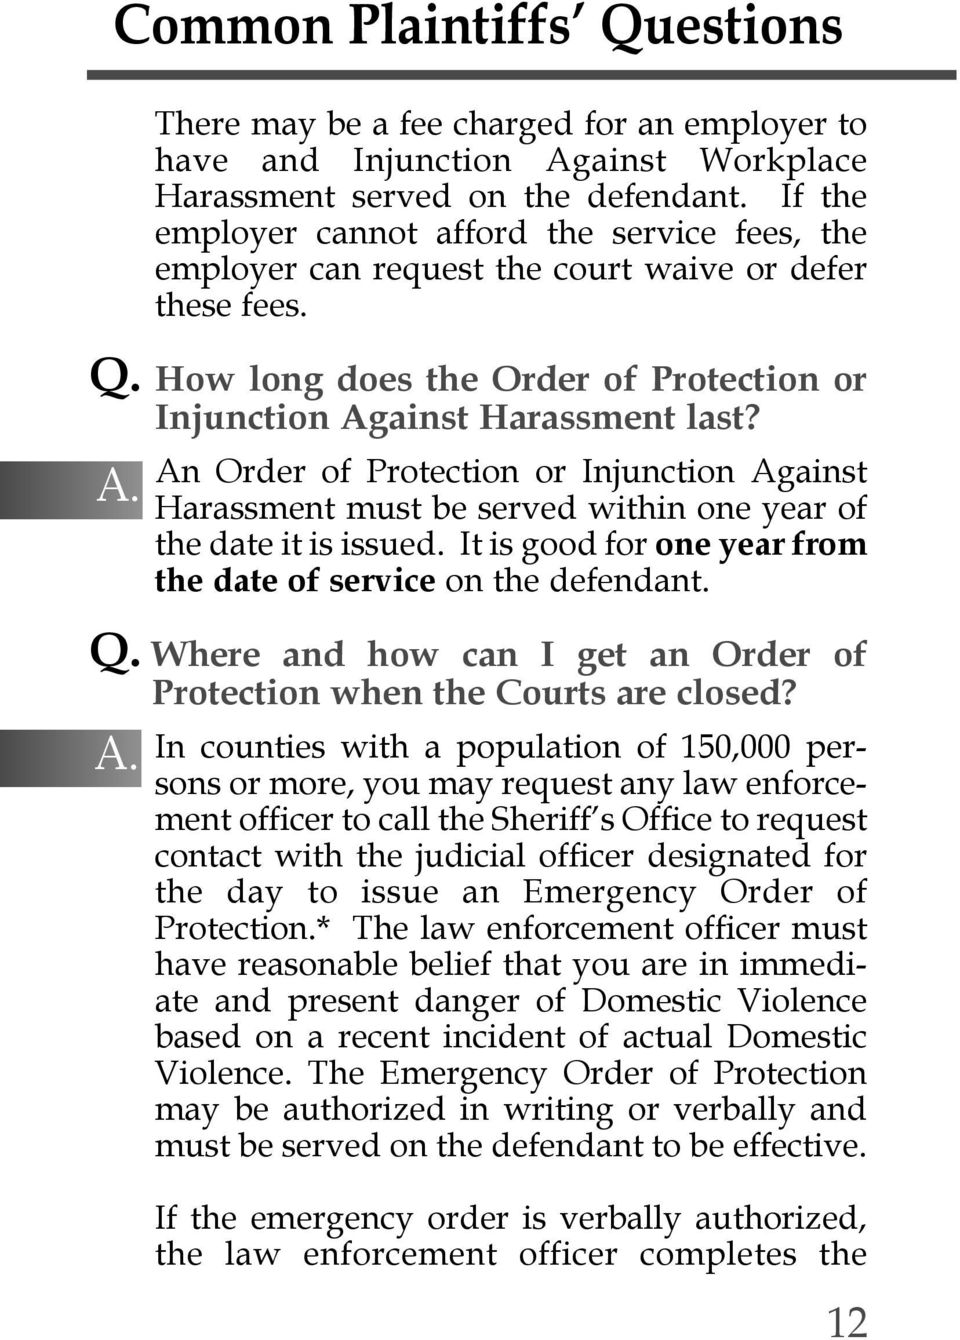 An Order of Protection or Injunction Against Harassment must be served within one year of the date it is issued. It is good for one year from the date of service on the defendant. Q.